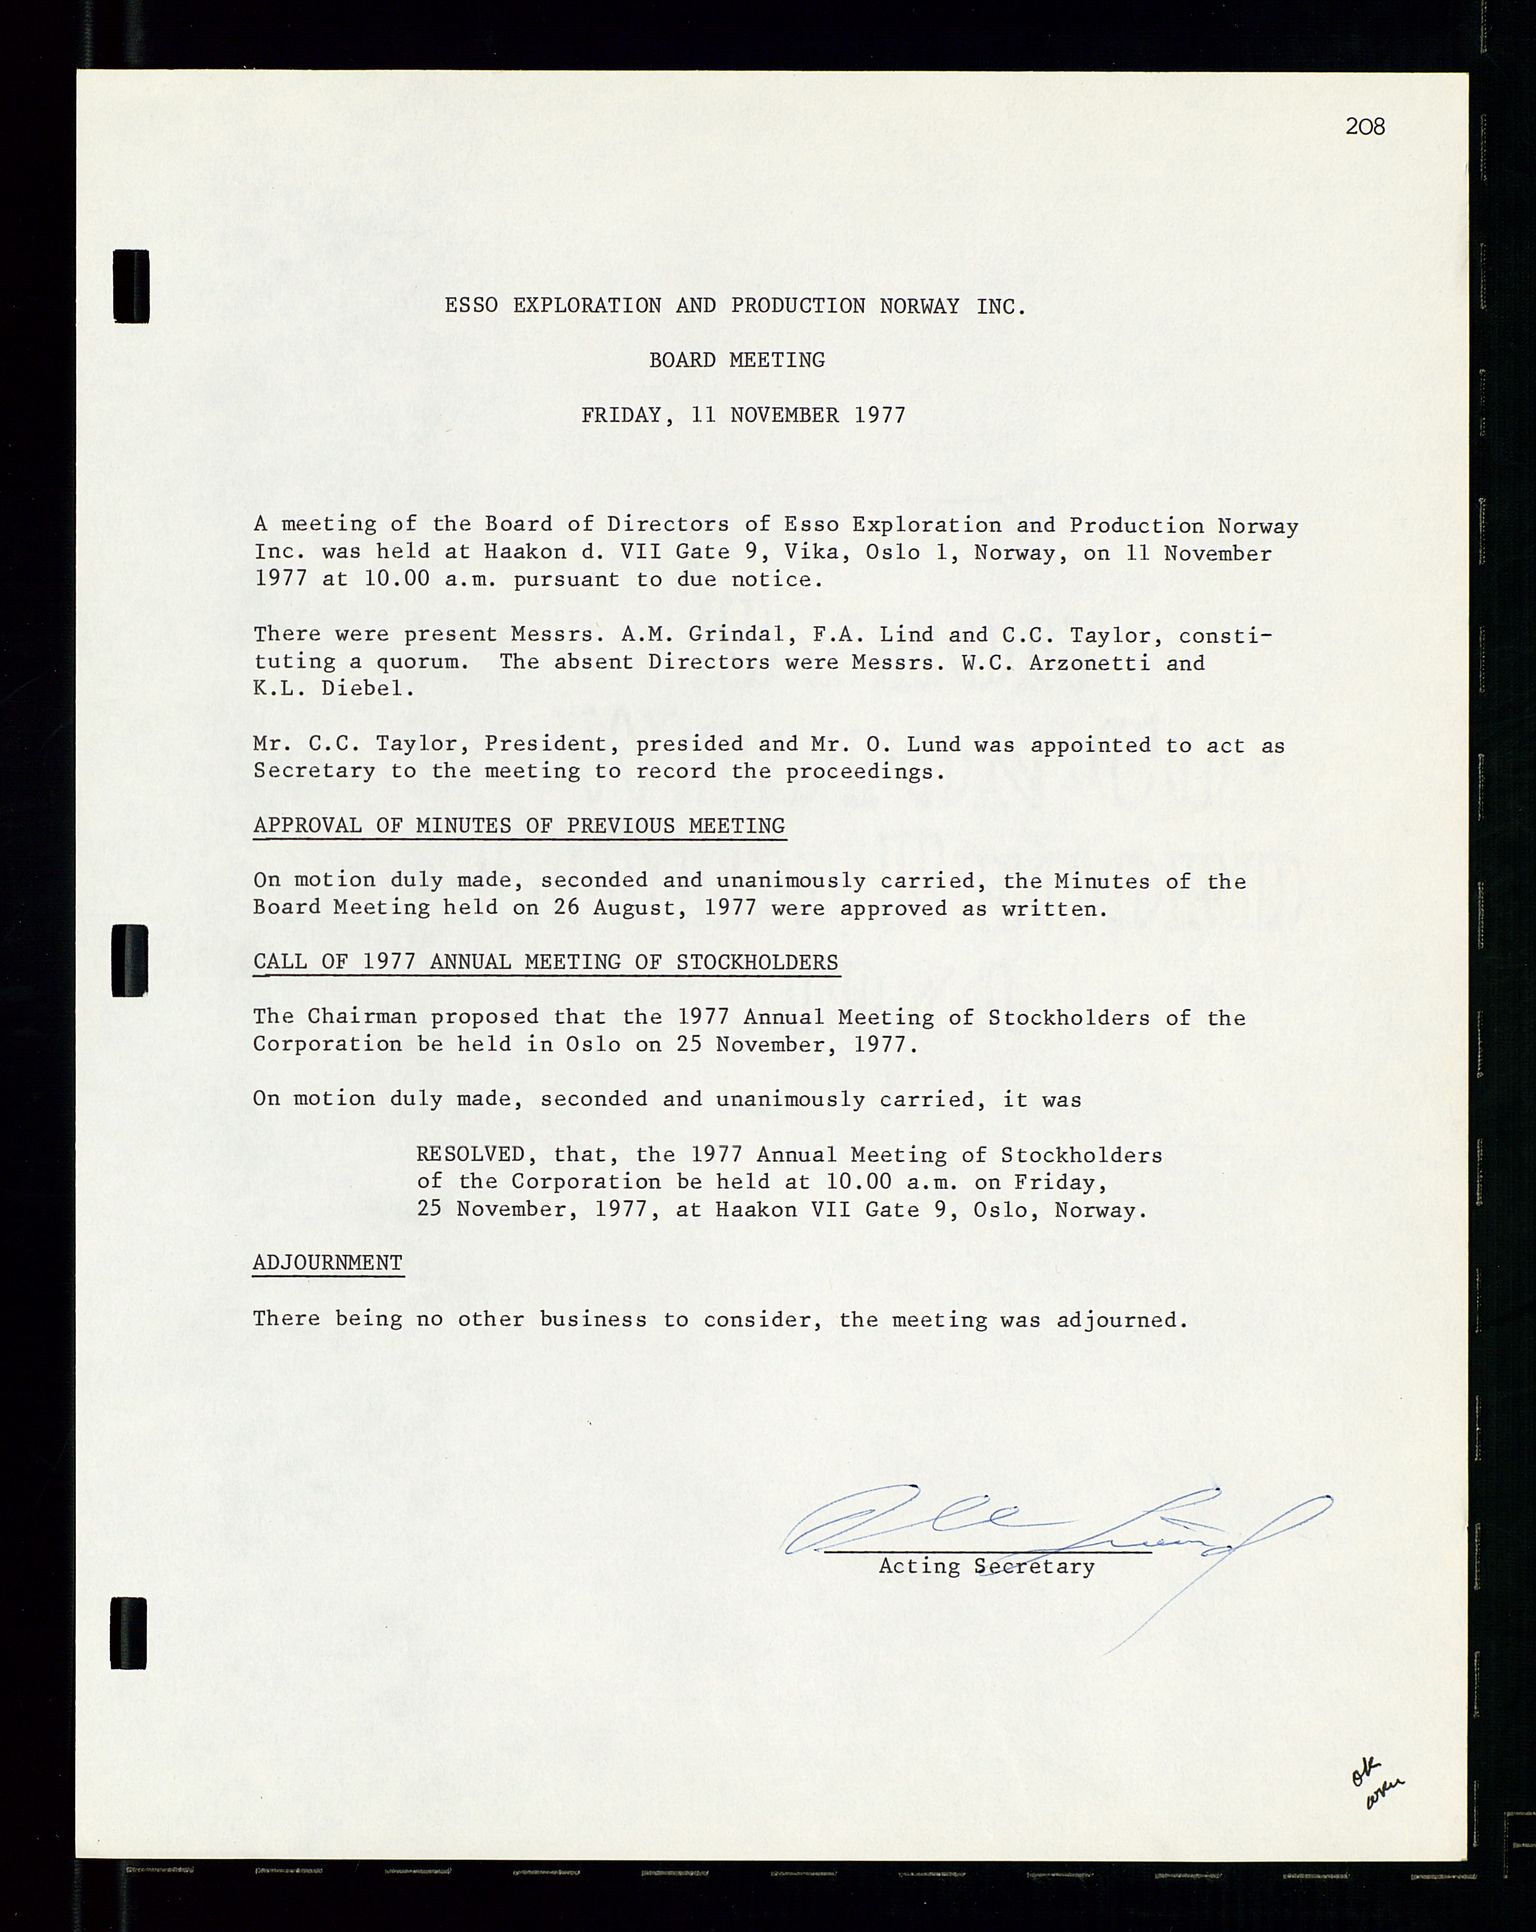 Pa 1512 - Esso Exploration and Production Norway Inc., SAST/A-101917/A/Aa/L0001/0002: Styredokumenter / Corporate records, Board meeting minutes, Agreements, Stocholder meetings, 1975-1979, s. 63